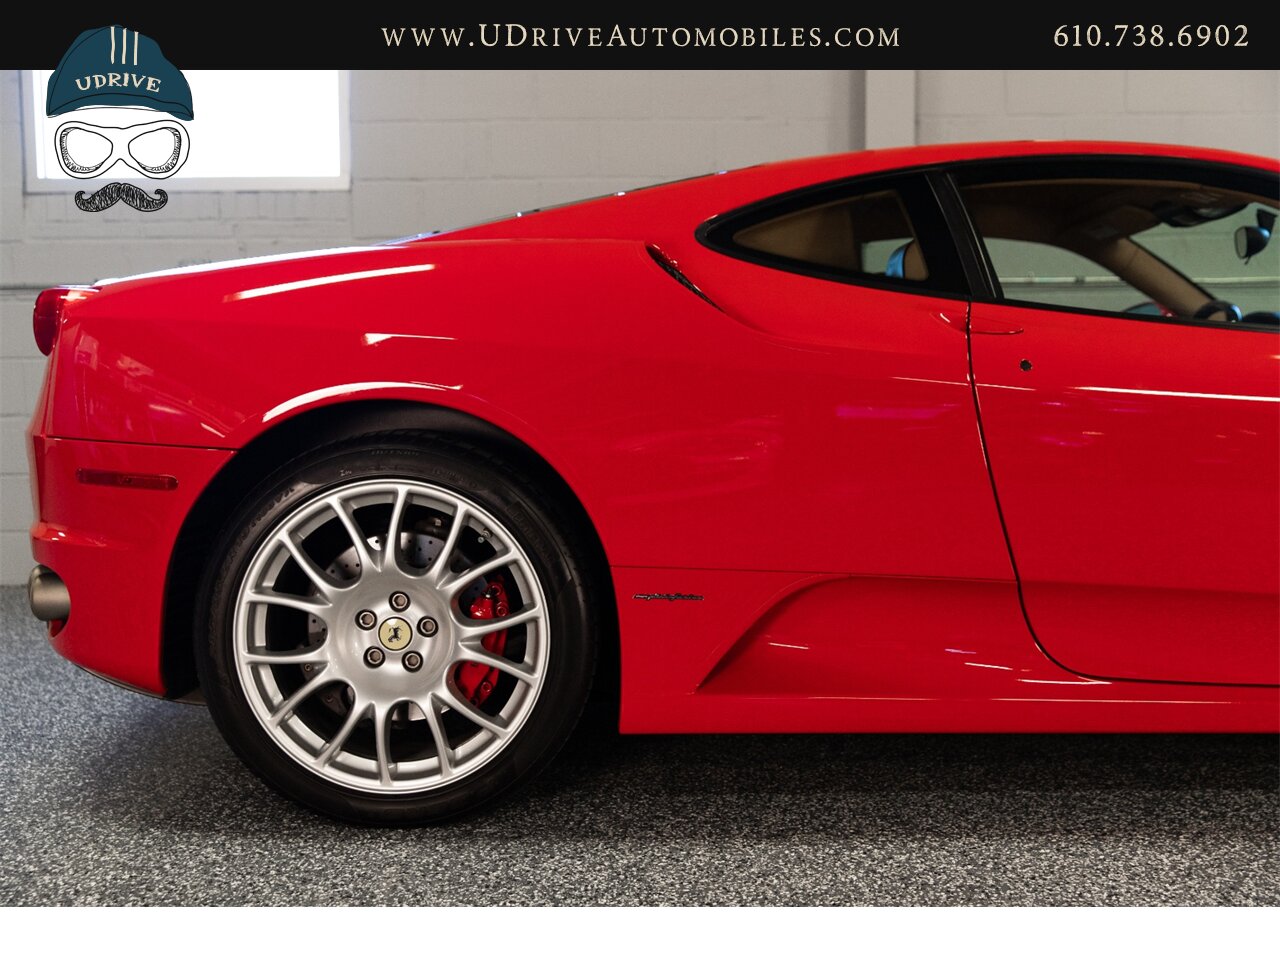 2006 Ferrari F430 F1 Coupe 1 Owner Daytona Seats Challenge Whls  Carbon Fibre Upper Lower Zone Shields Piping Serv Hist $208k MSRP - Photo 15 - West Chester, PA 19382